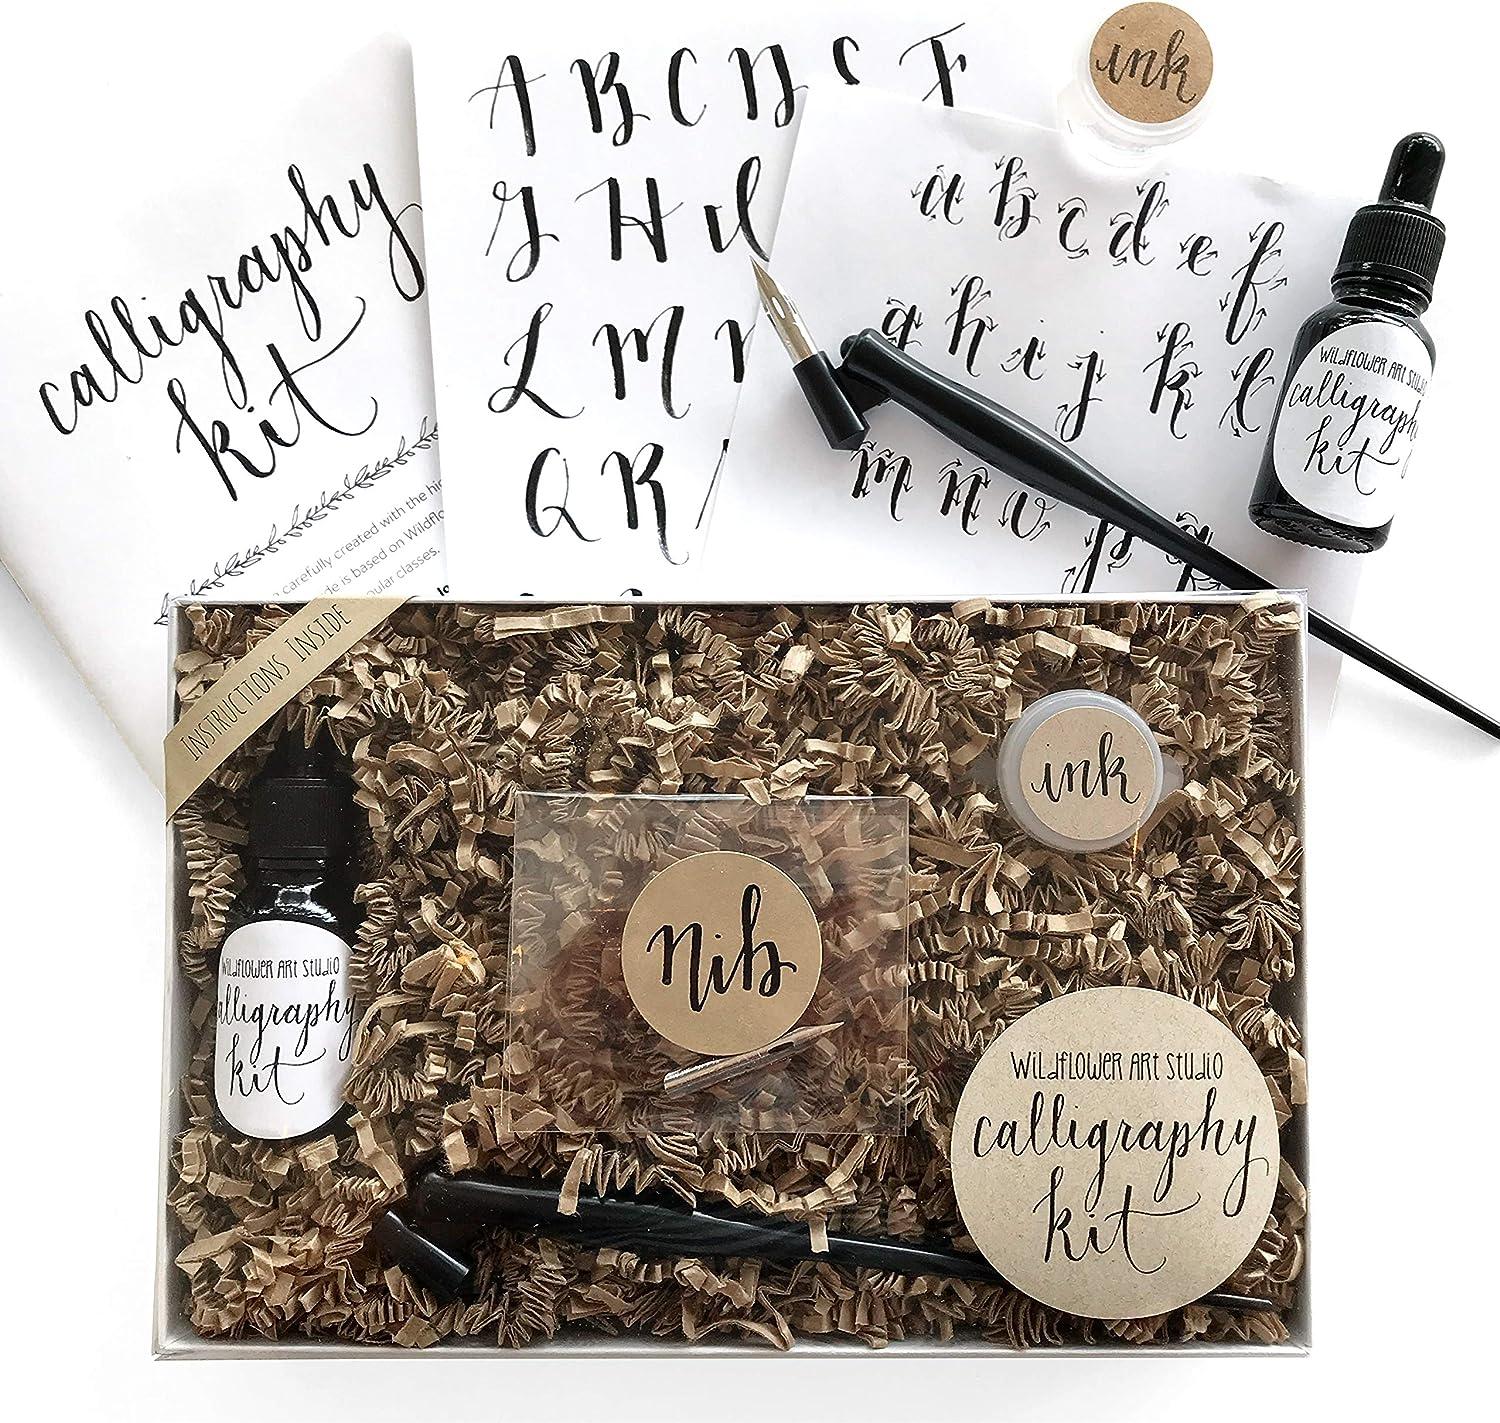 Beginner Hand Lettering & Calligraphy Set - 12 Pieces –